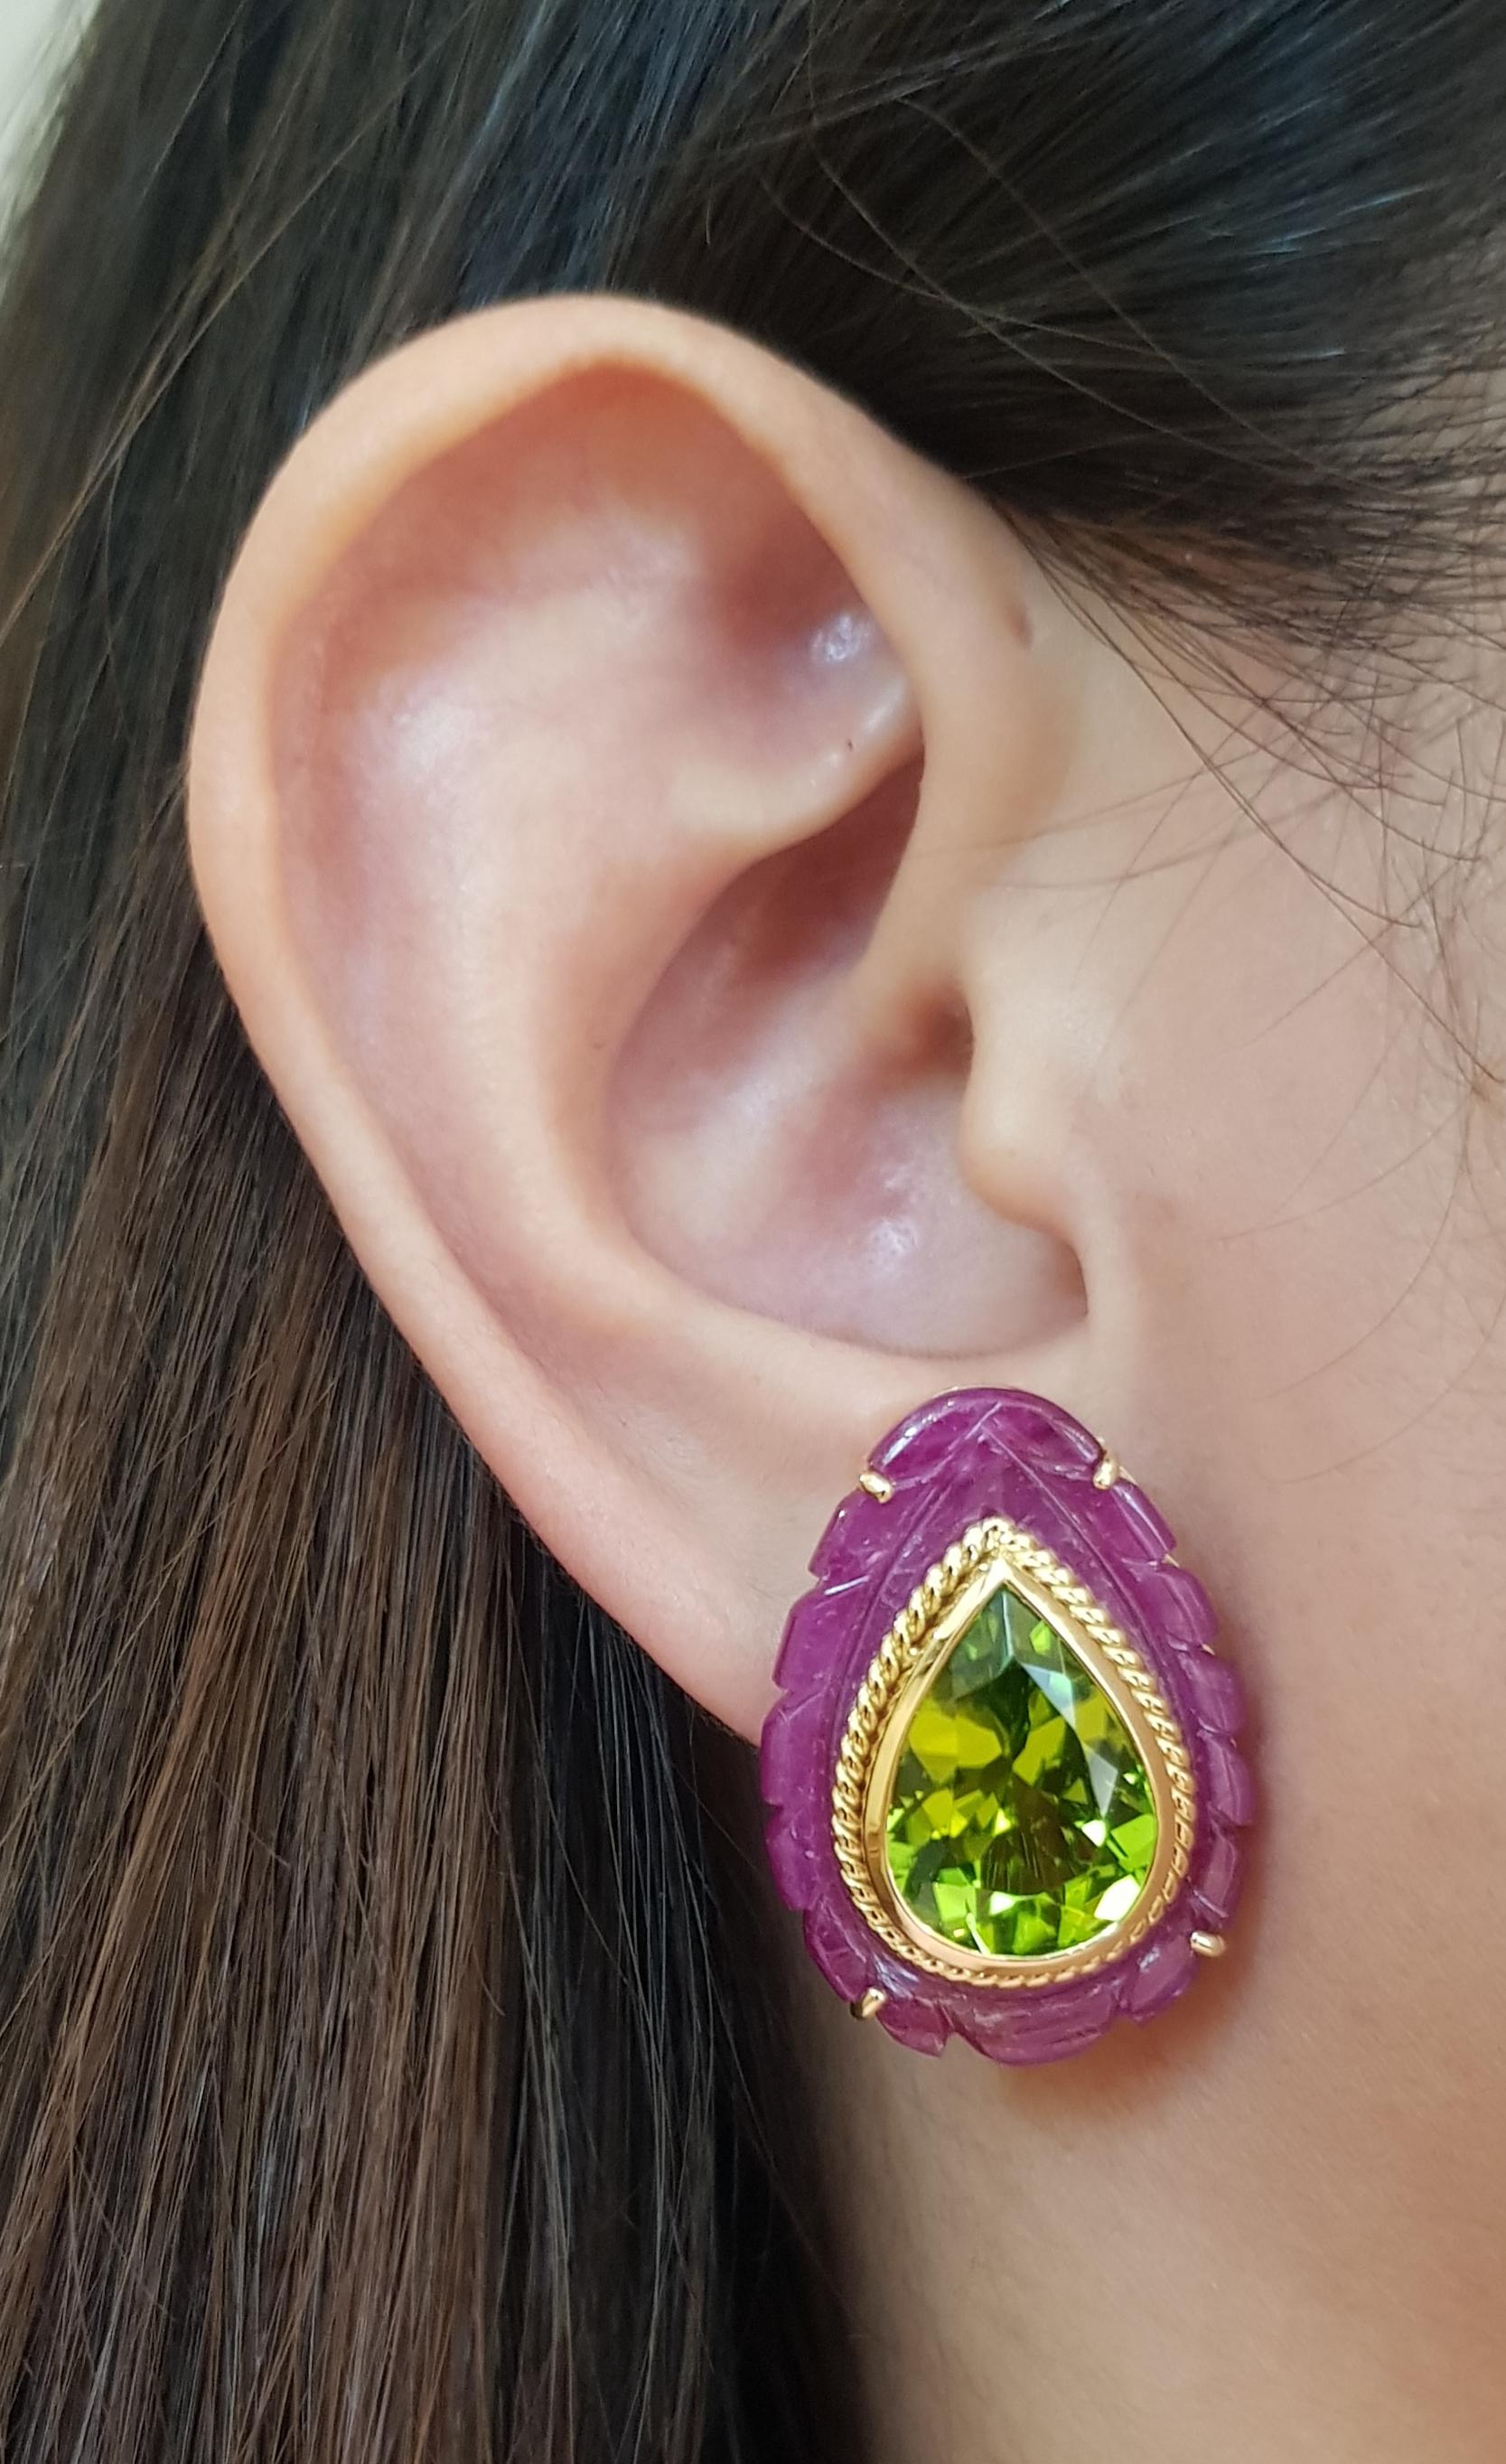 Peridot 11.51 carats with Ruby 25.34 carats Earrings set in 18 Karat Gold Settings

Width:   2.0 cm 
Length:  2.8 cm
Total Weight: 19.9 grams

